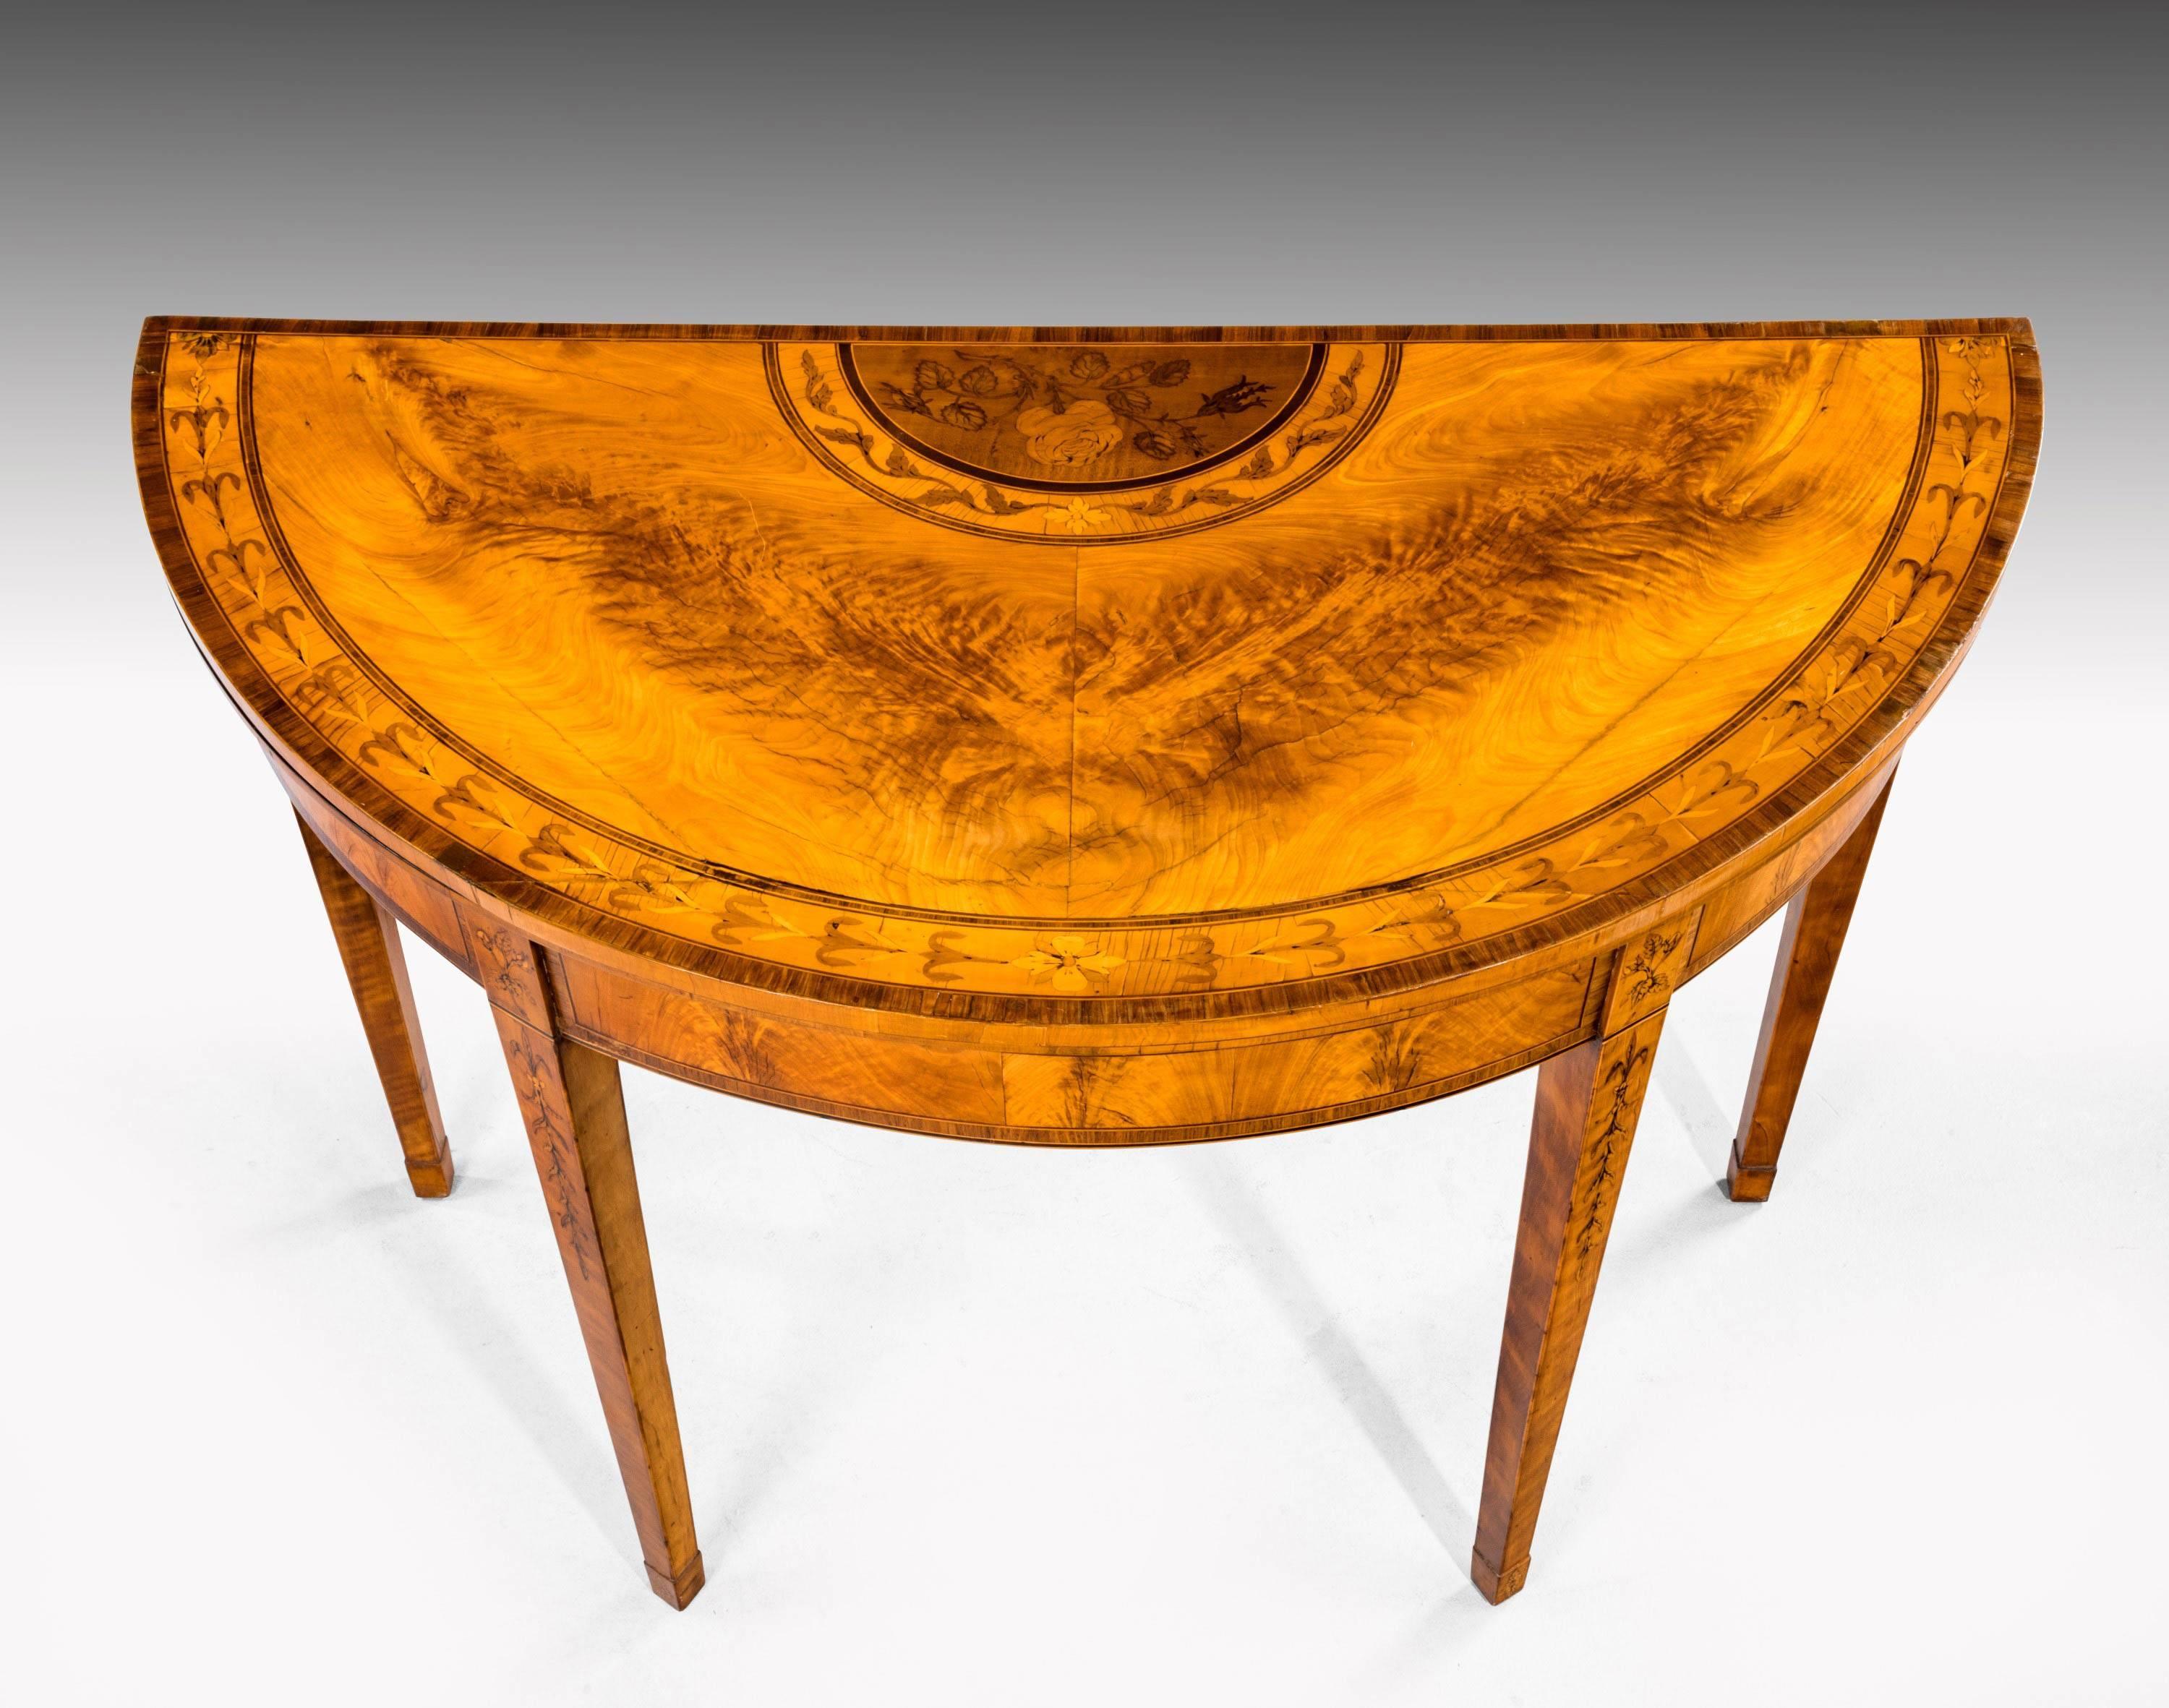 Pair of George III Period Satinwood Card Tables with Harebell and Leaf Decoratio In Good Condition In Peterborough, Northamptonshire